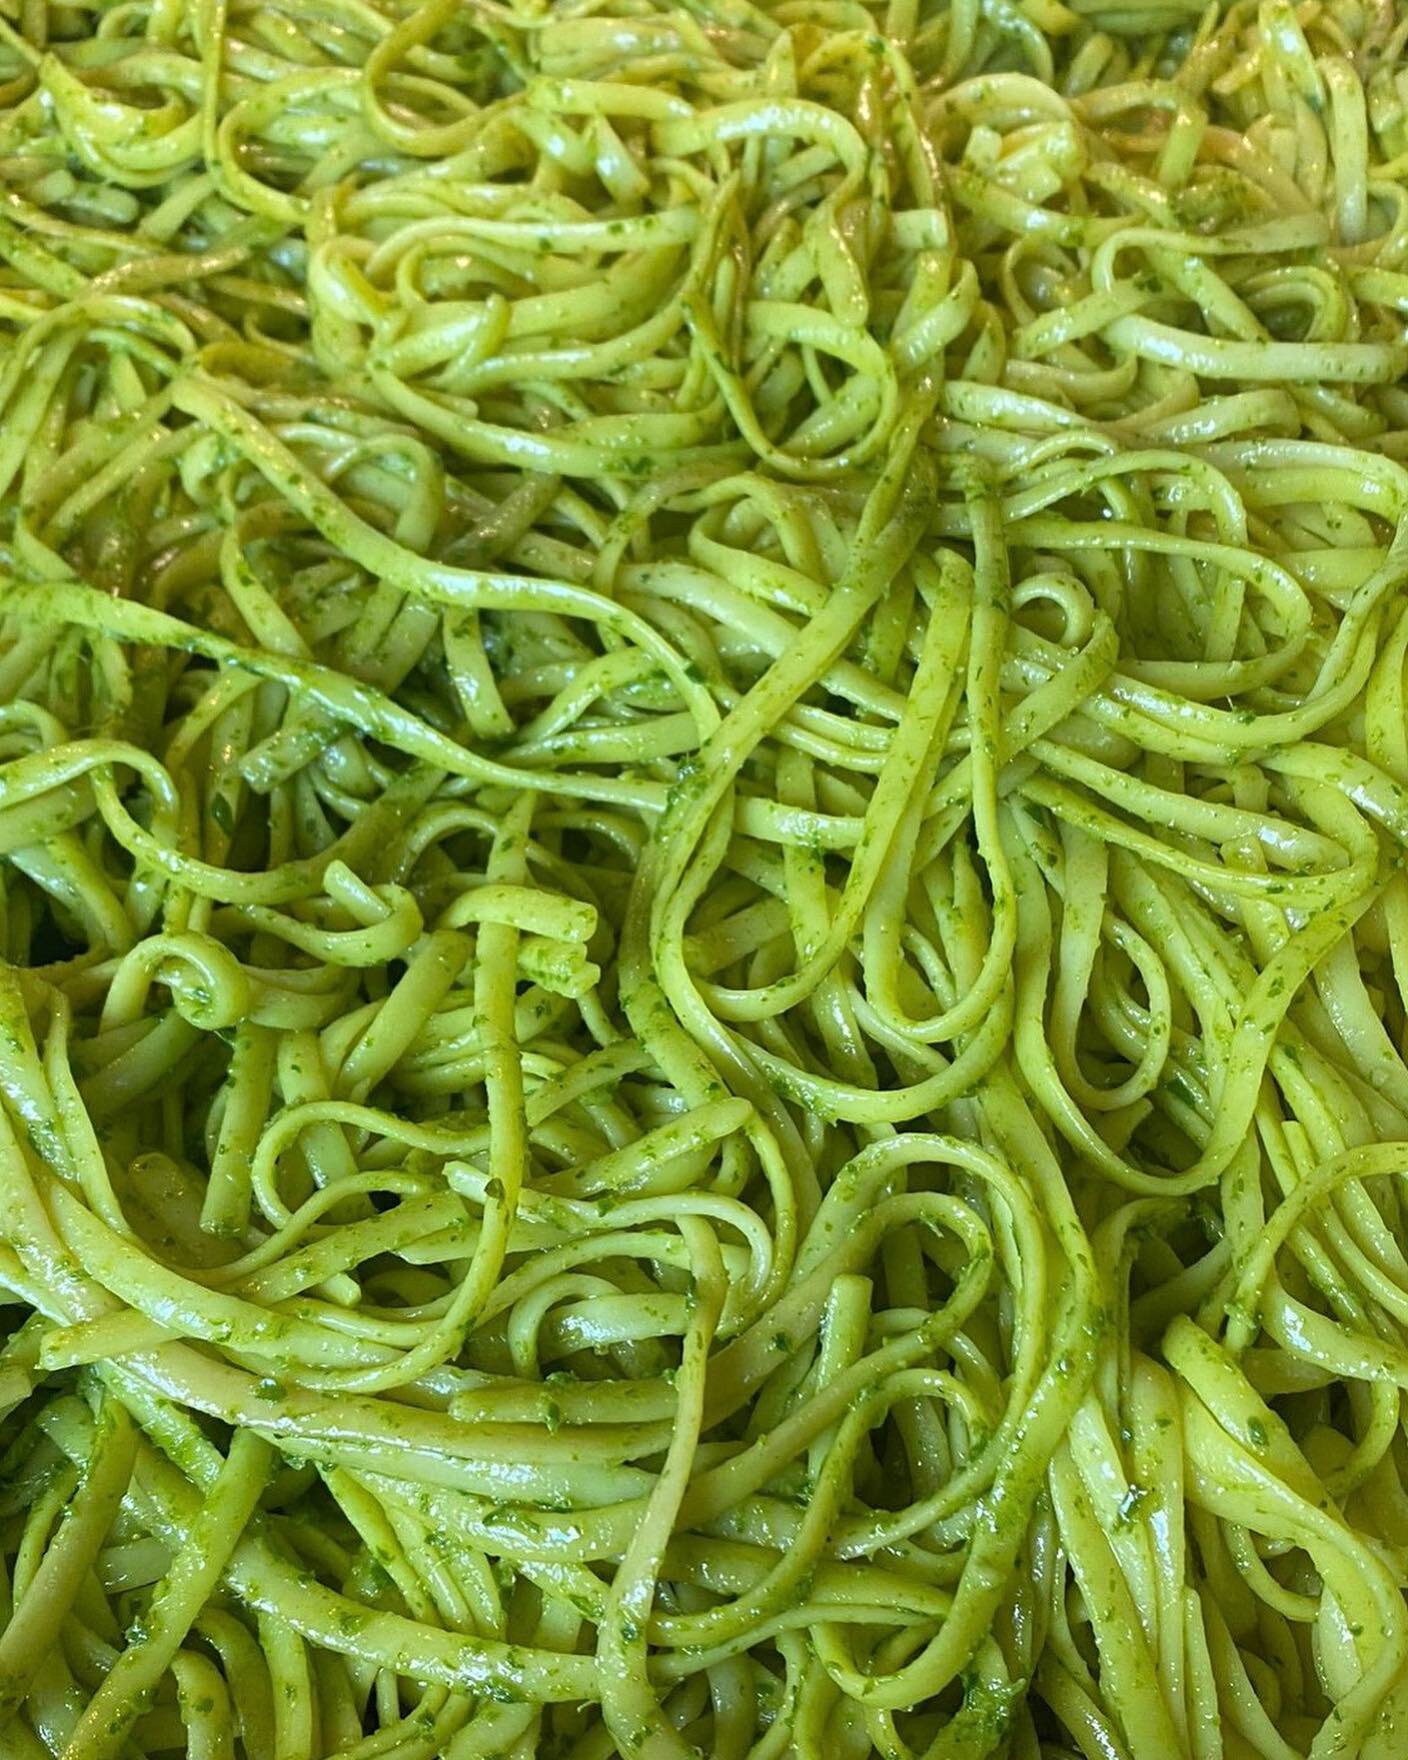 Cilantro infused Edamame Noodles 🍜 
A good carbohydrate source with high protein content. 

Cilantro - Protect your heart 
Olive Oil - Omega 3 
Edamame Noodles - Rich in healthy fiber

Check our MENU for next week in our BIO 😃